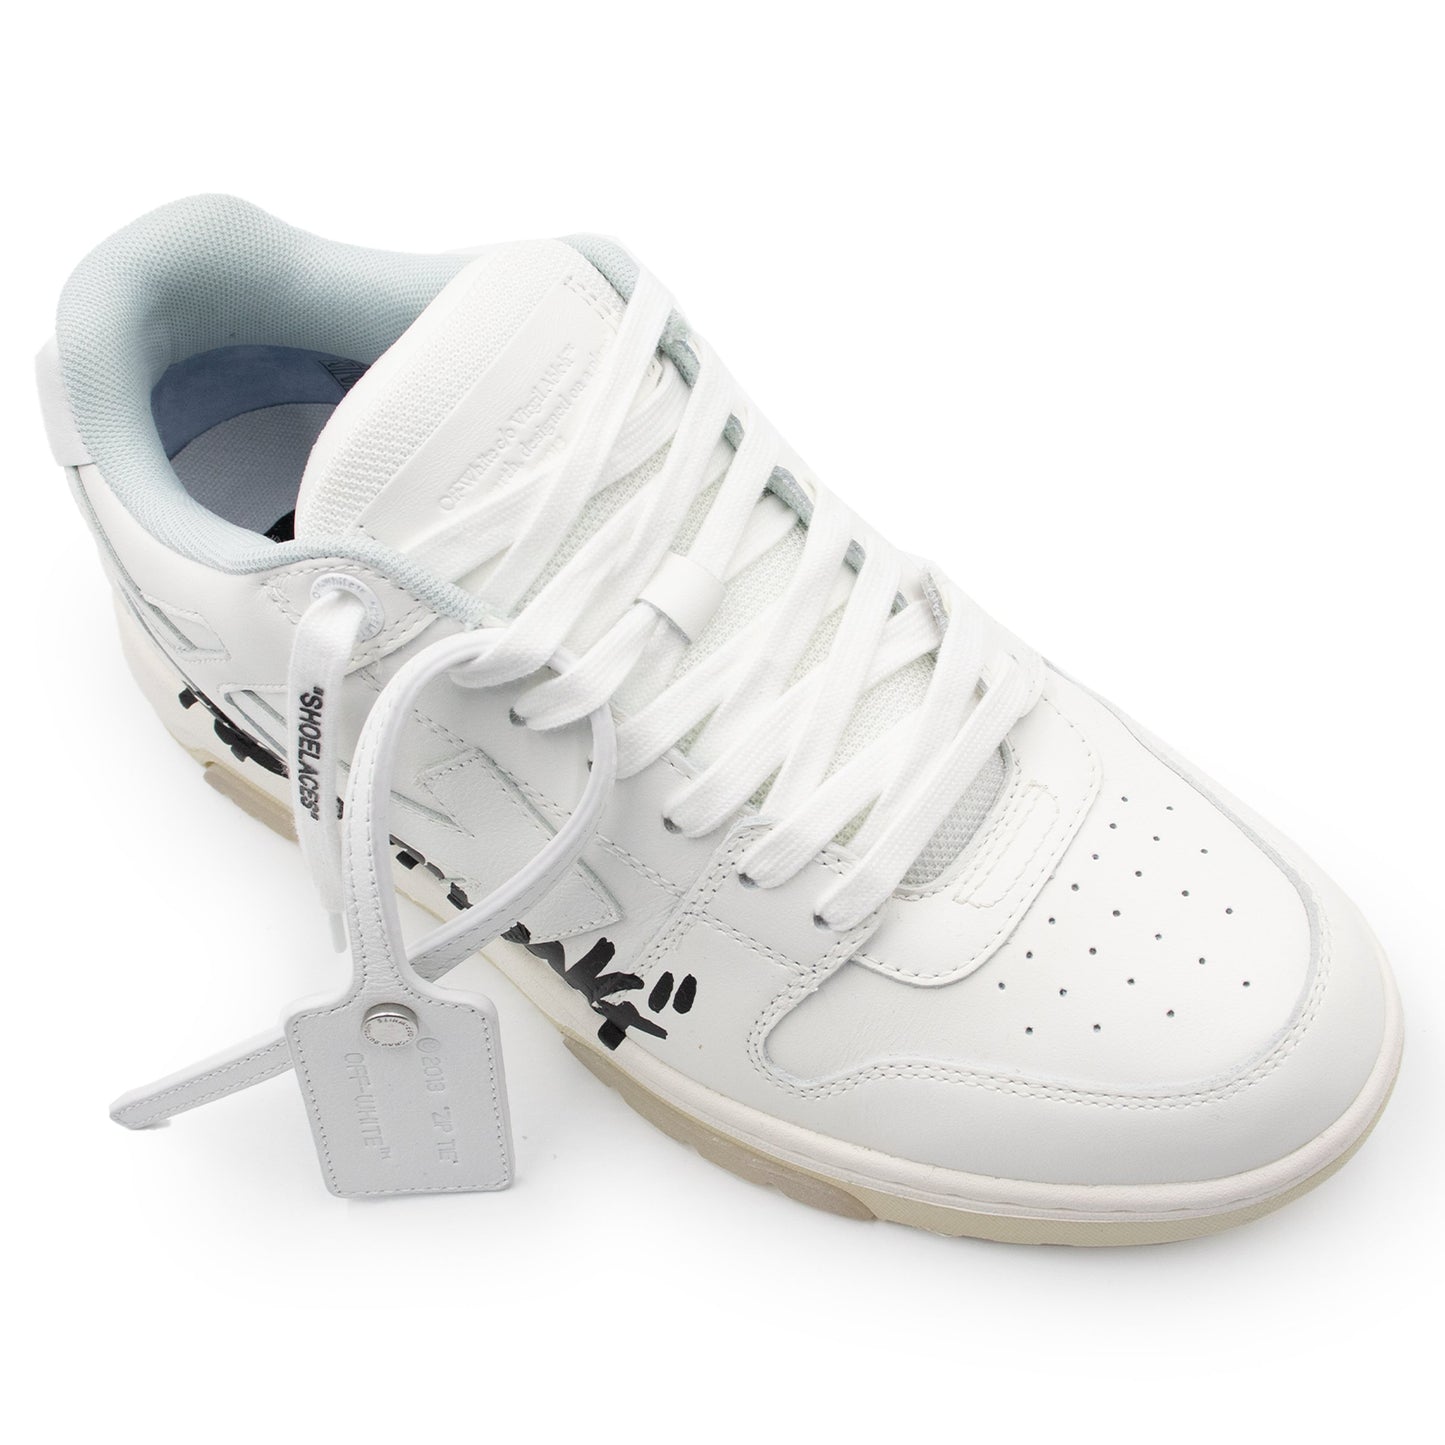 Out Of Office "For Walking" Sneakers in White/Black